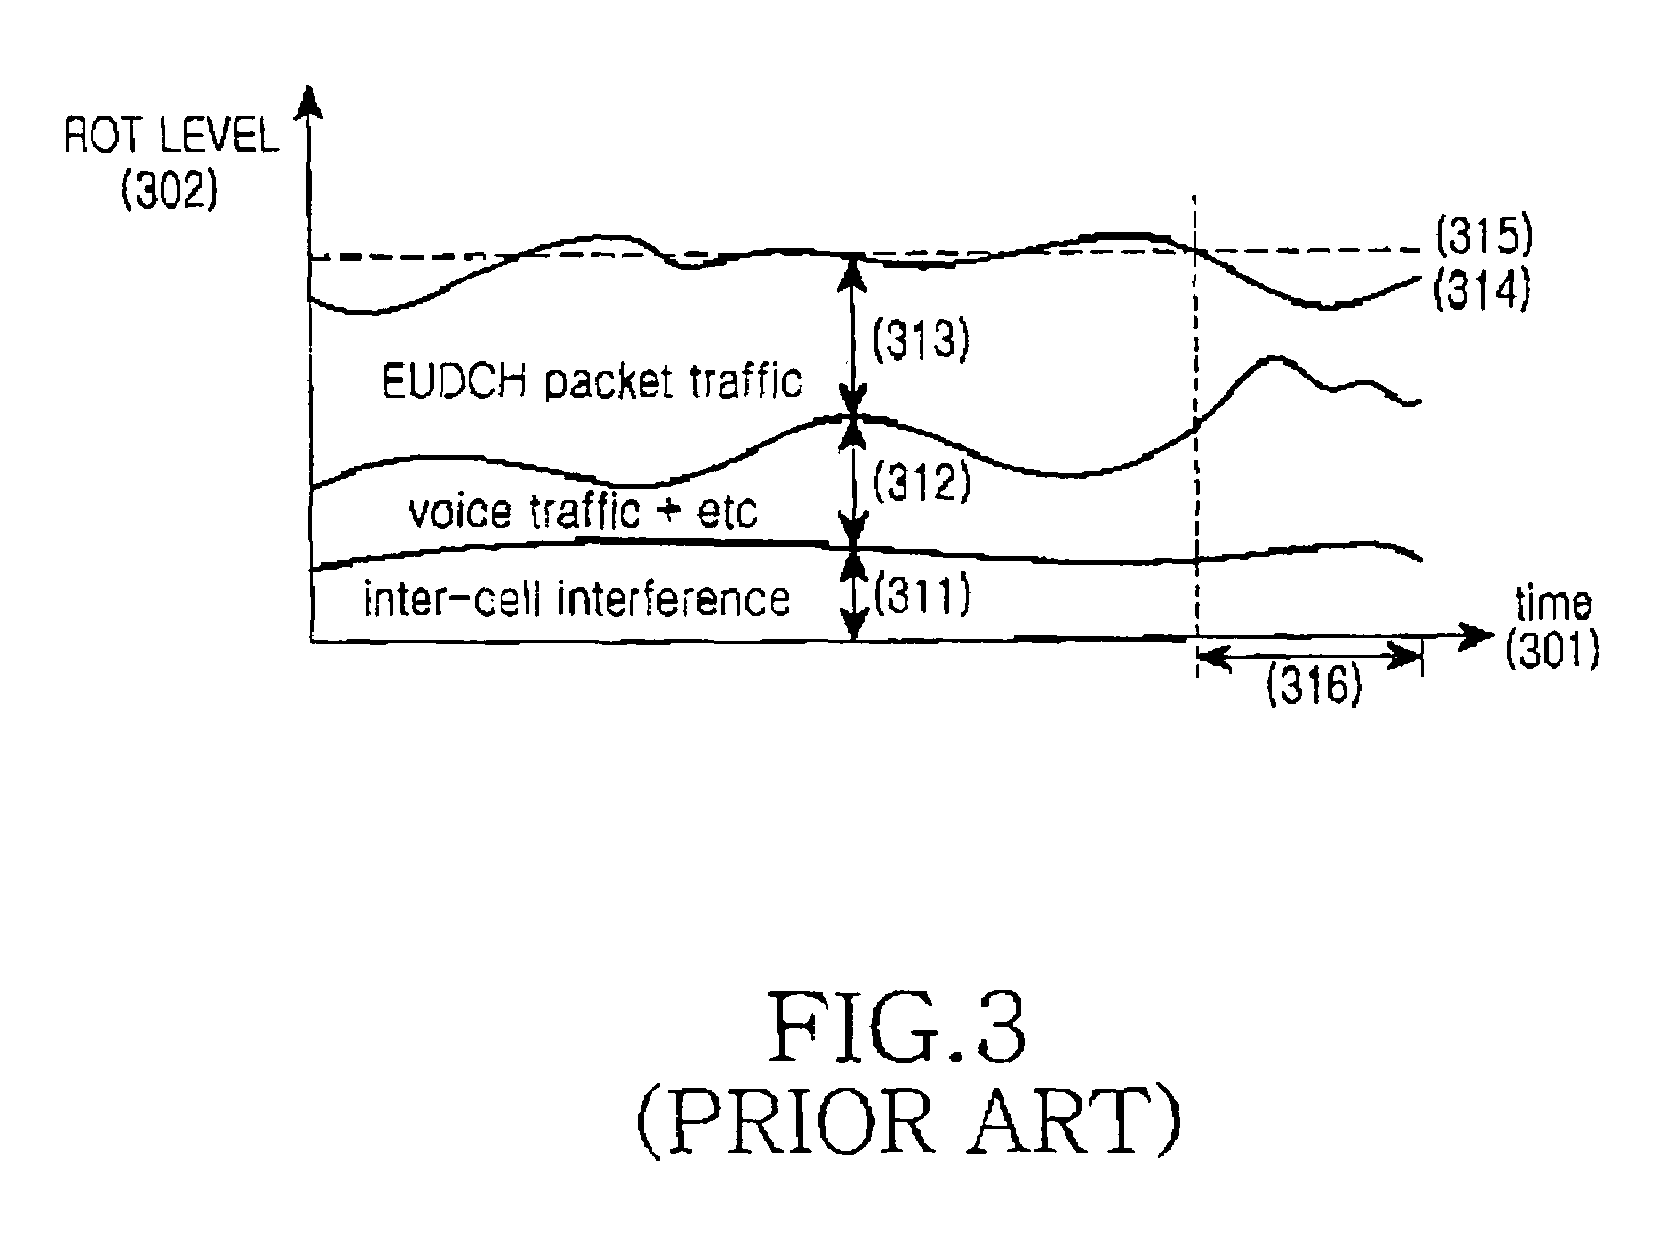 Scheduling apparatus and method for determining a desired noise rise over thermal noise in a CDMA mobile communication system